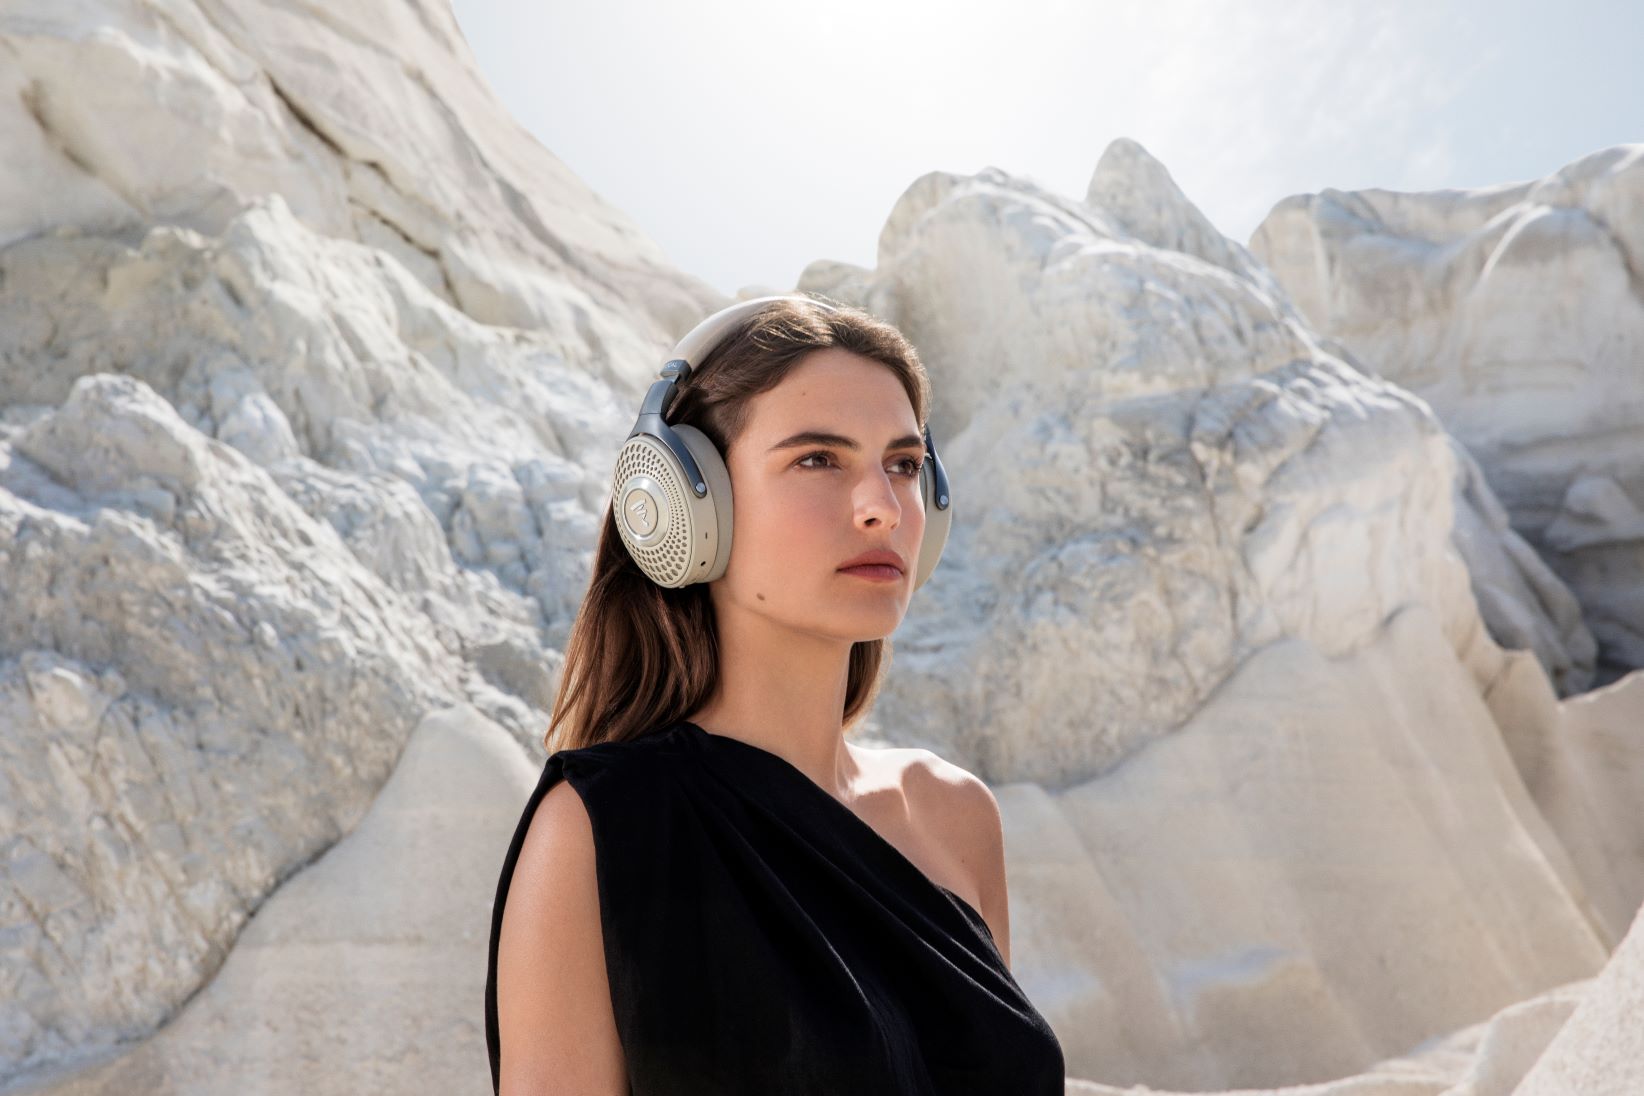 Focal Bathys Headphones: Now Available In Dune Color With New Personalized Hearing Profile